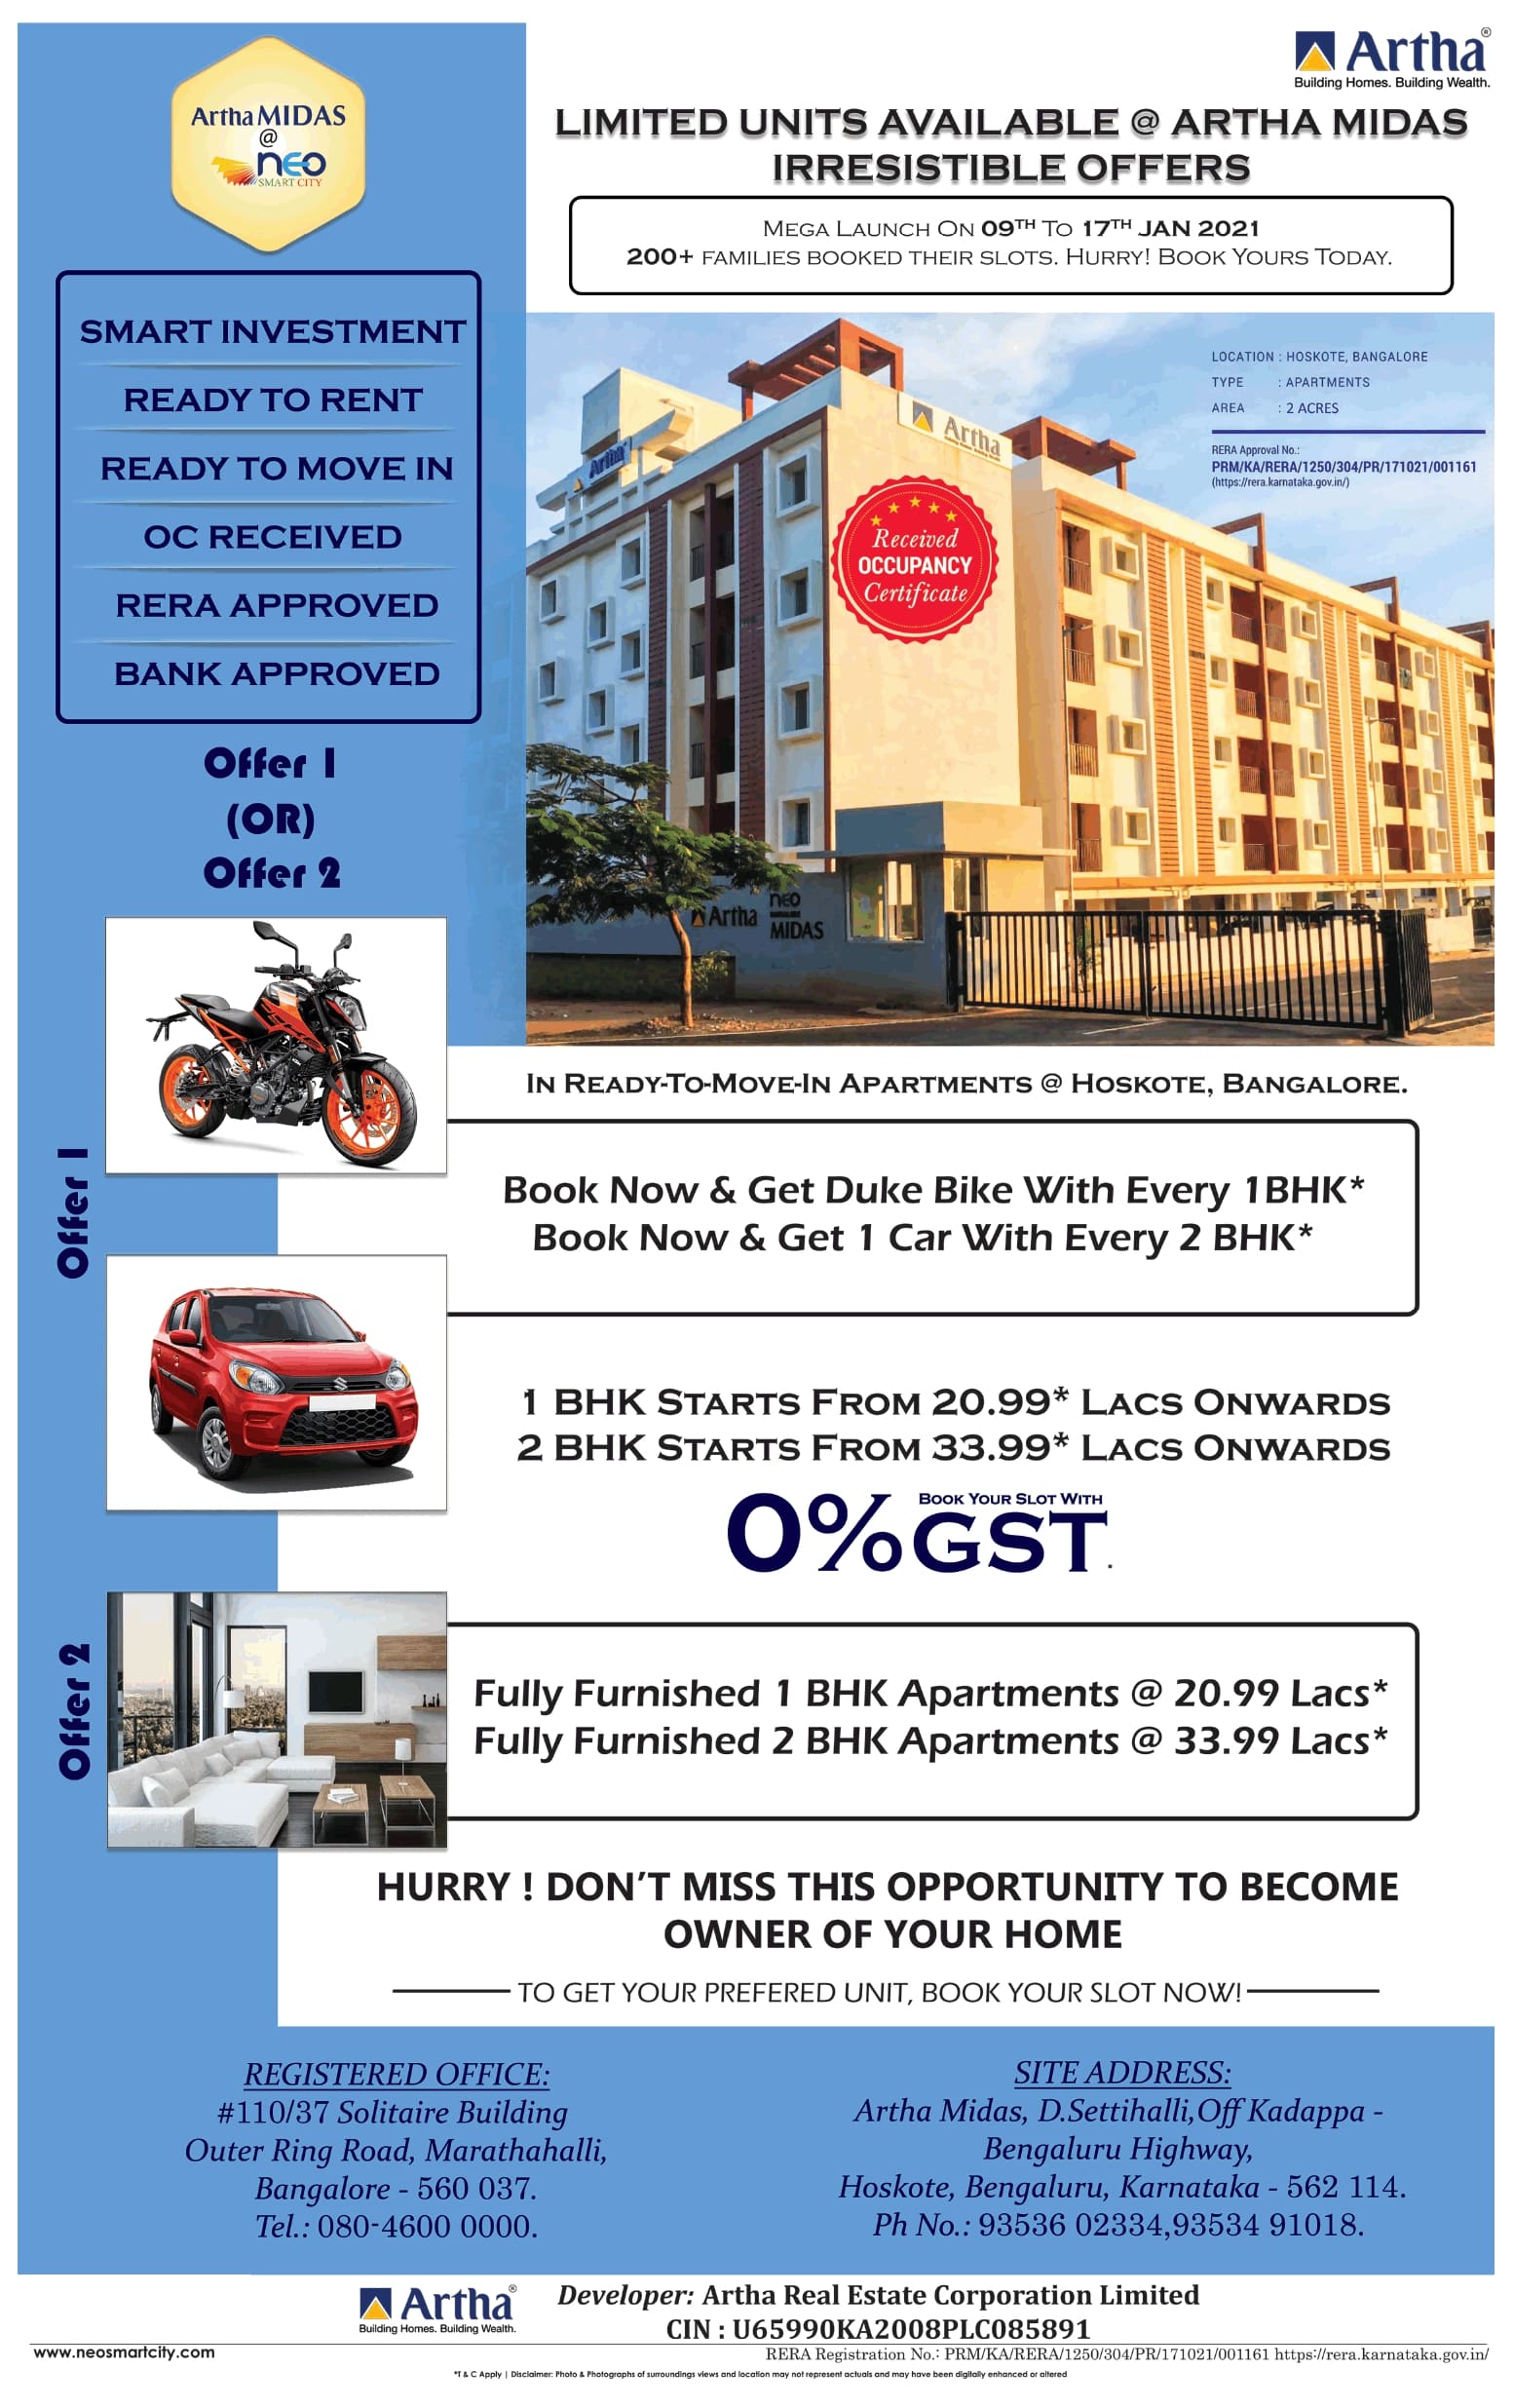 Artha Limited Units Available At Artha Midas 1 Bhk Starts From 20 99 ...